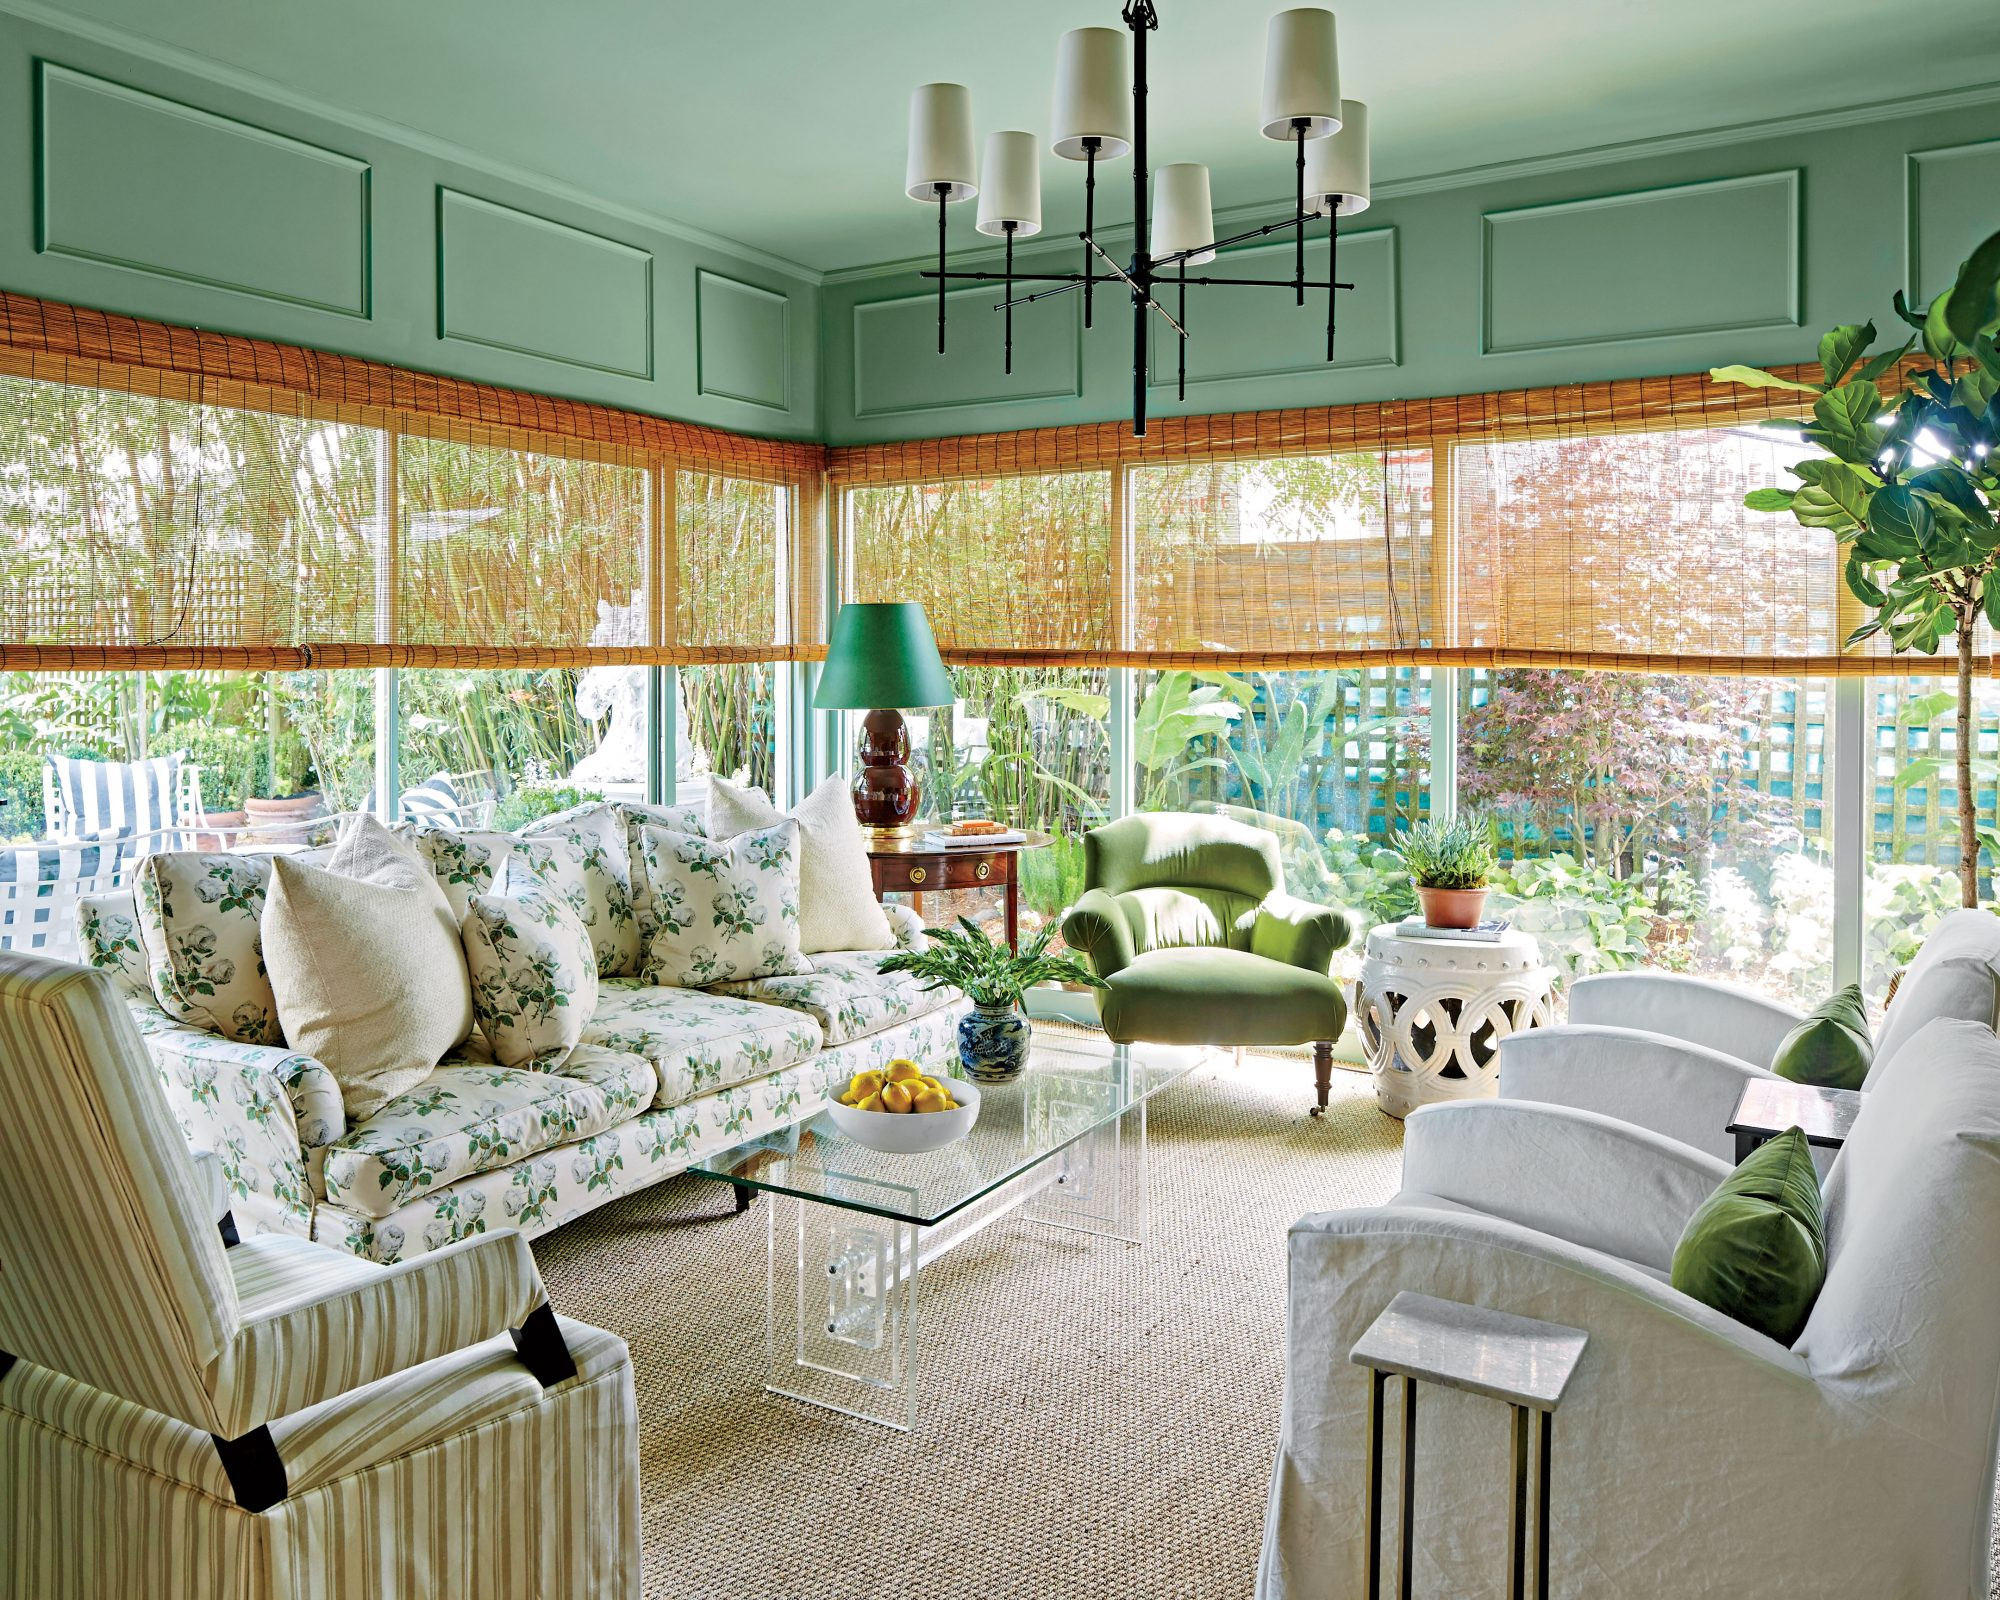 Green Paint For Living Room
 Sage Green is the New Neutral Southern Living